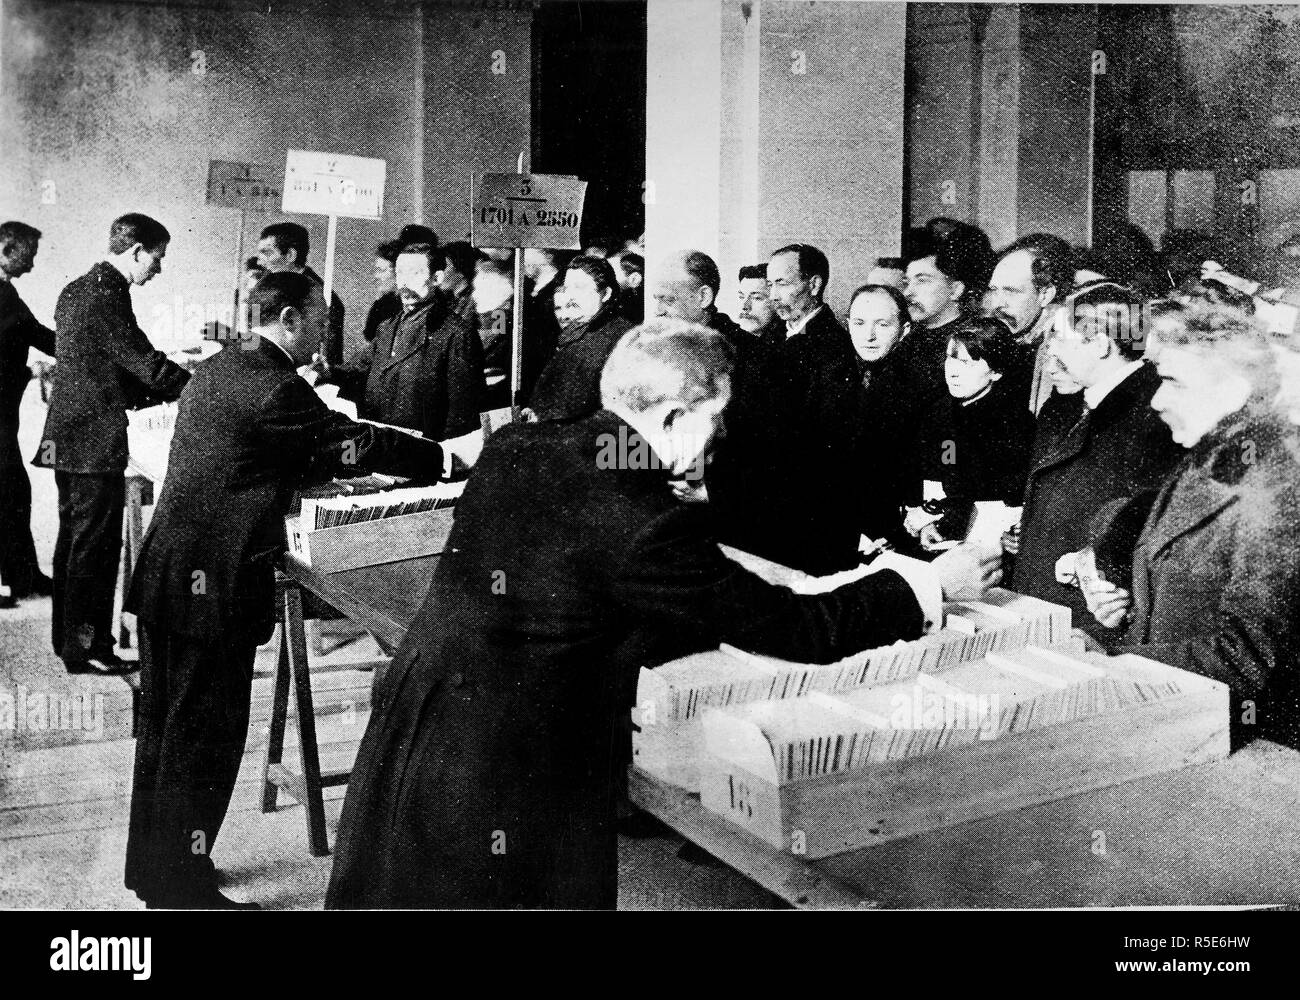 Food Administration - Anti-Waste Campaign - Americans save food to aid Belgium. Issuing food tickets in Brussels ca. 1917-1919 Stock Photo